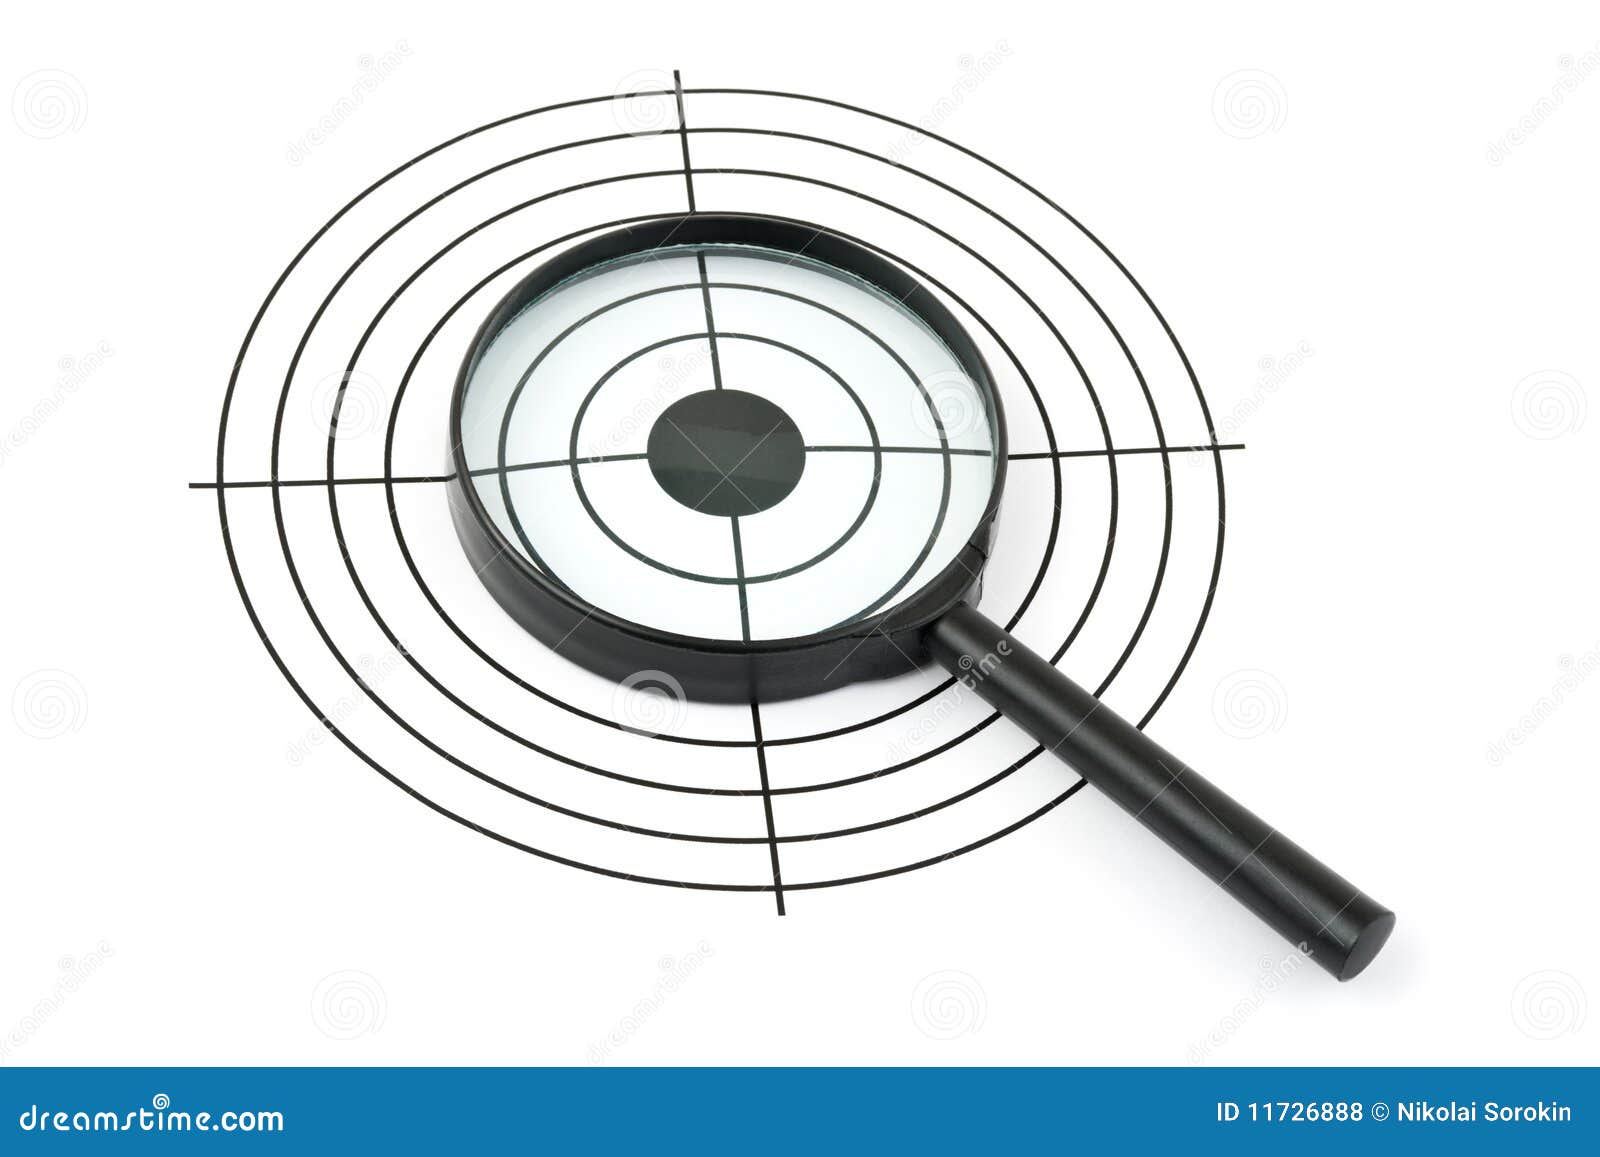 Magnifying Glass And Target Stock Photo - Image of center ...